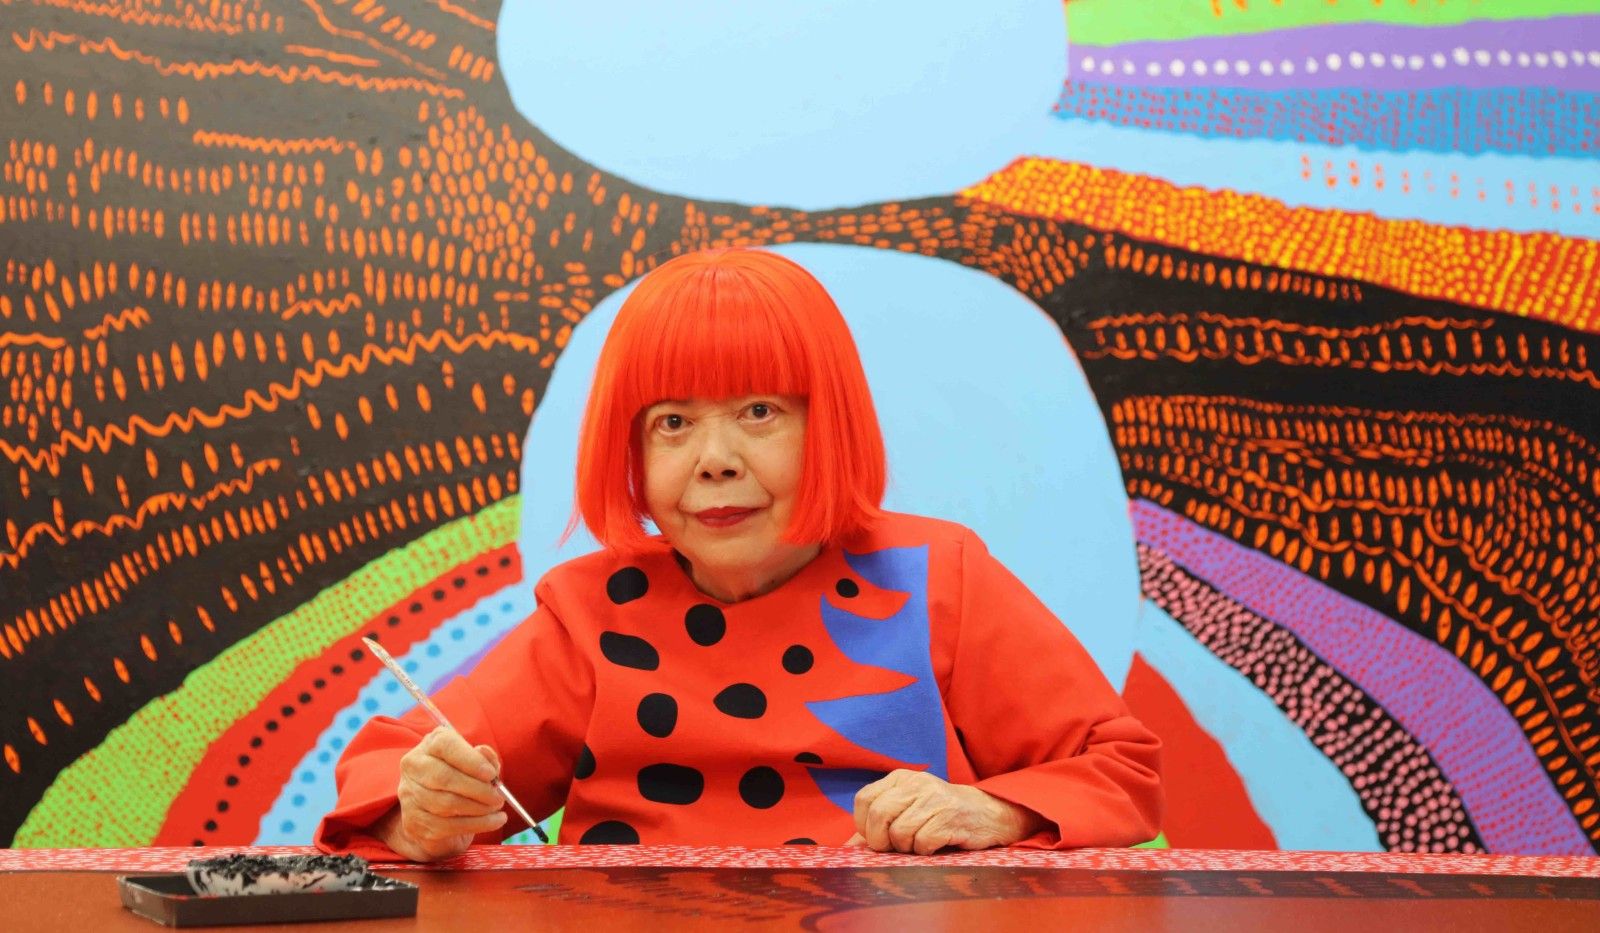 Yayoi Kusama shares an uplifting poem in response to the COVID-19 pandemic